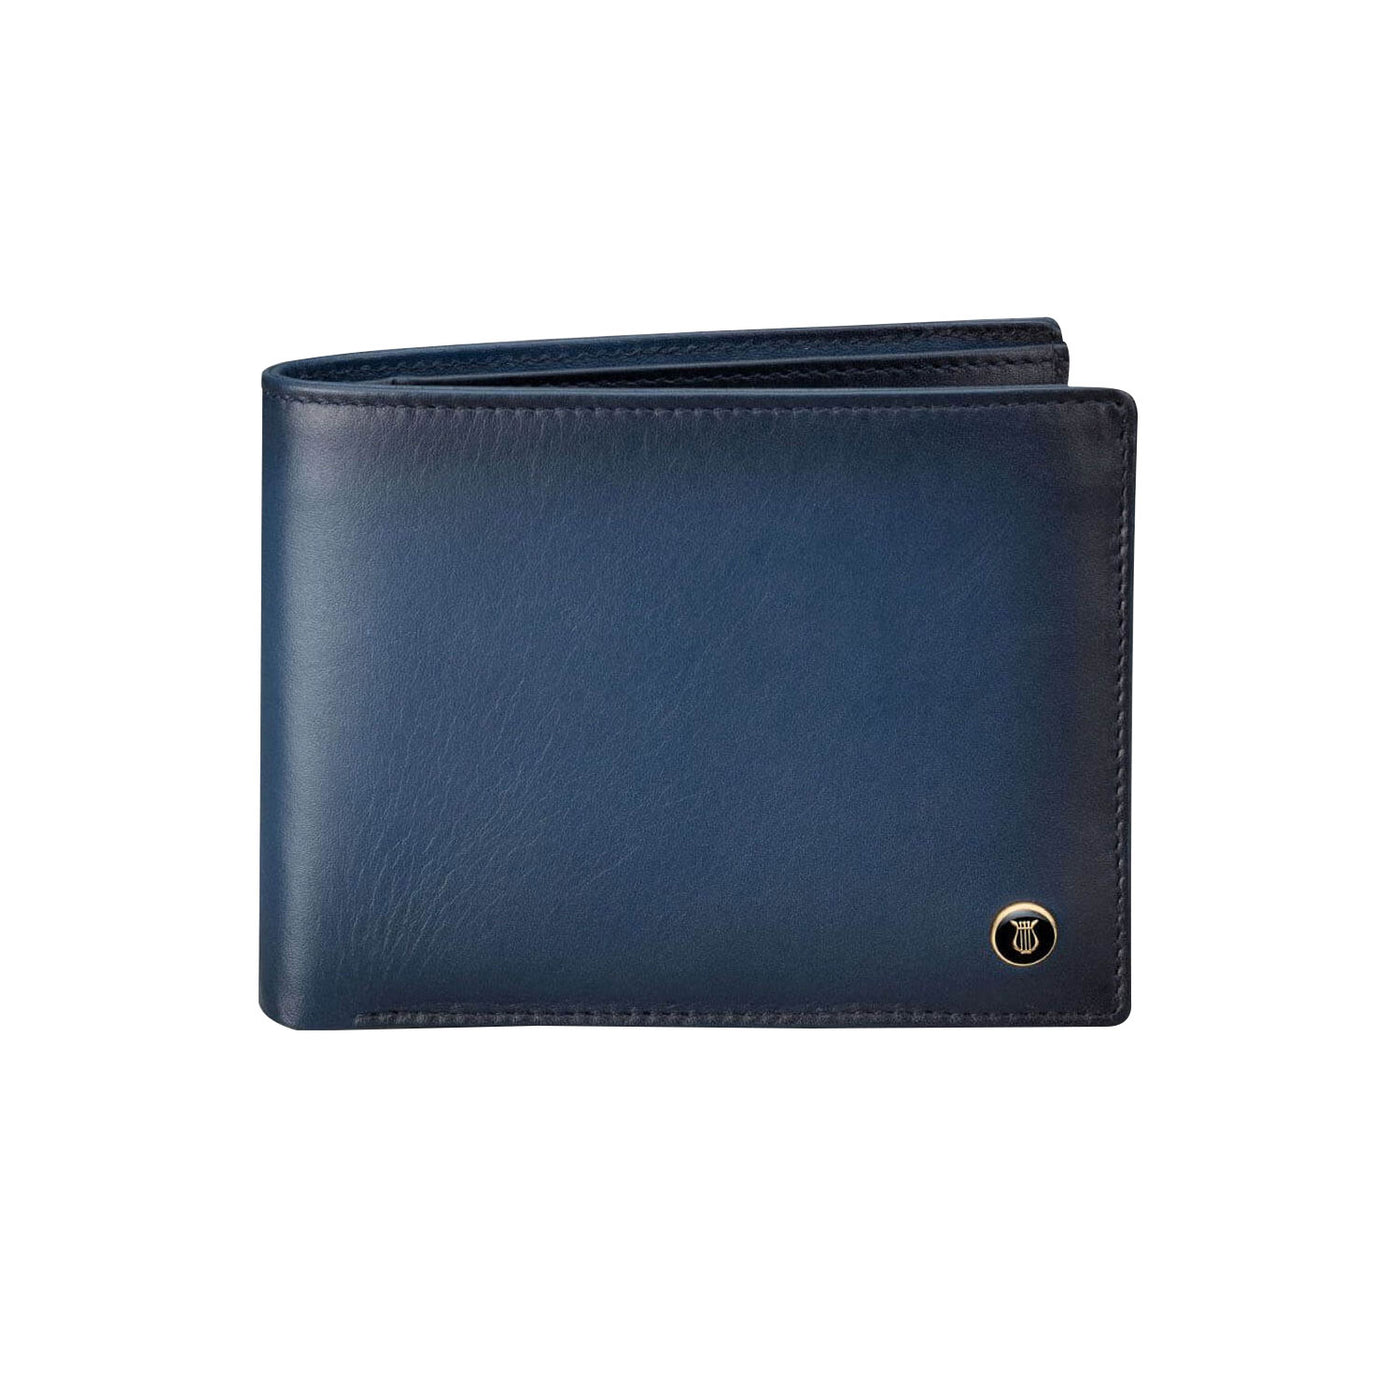 Lapis Bard Ducorium Bifold Evening 6cc Wallet with Additional Sleeve - Blue 1